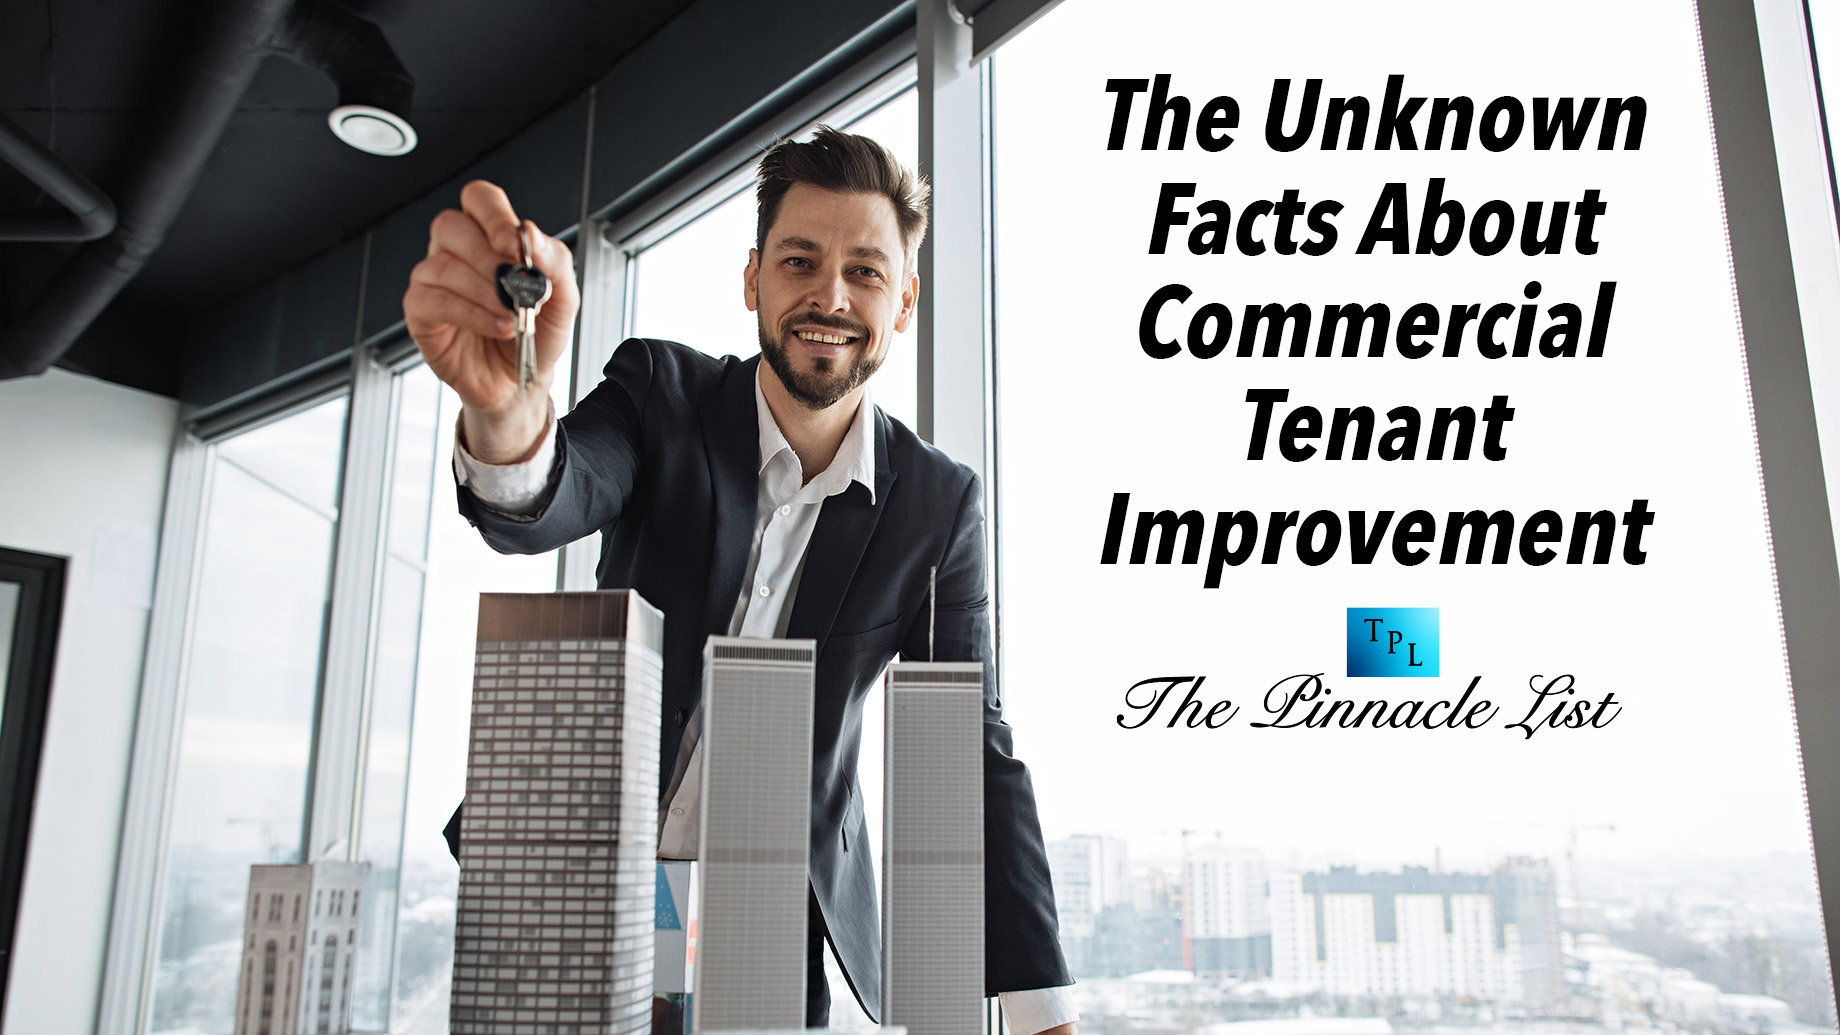 The Unknown Facts About Commercial Tenant Improvement